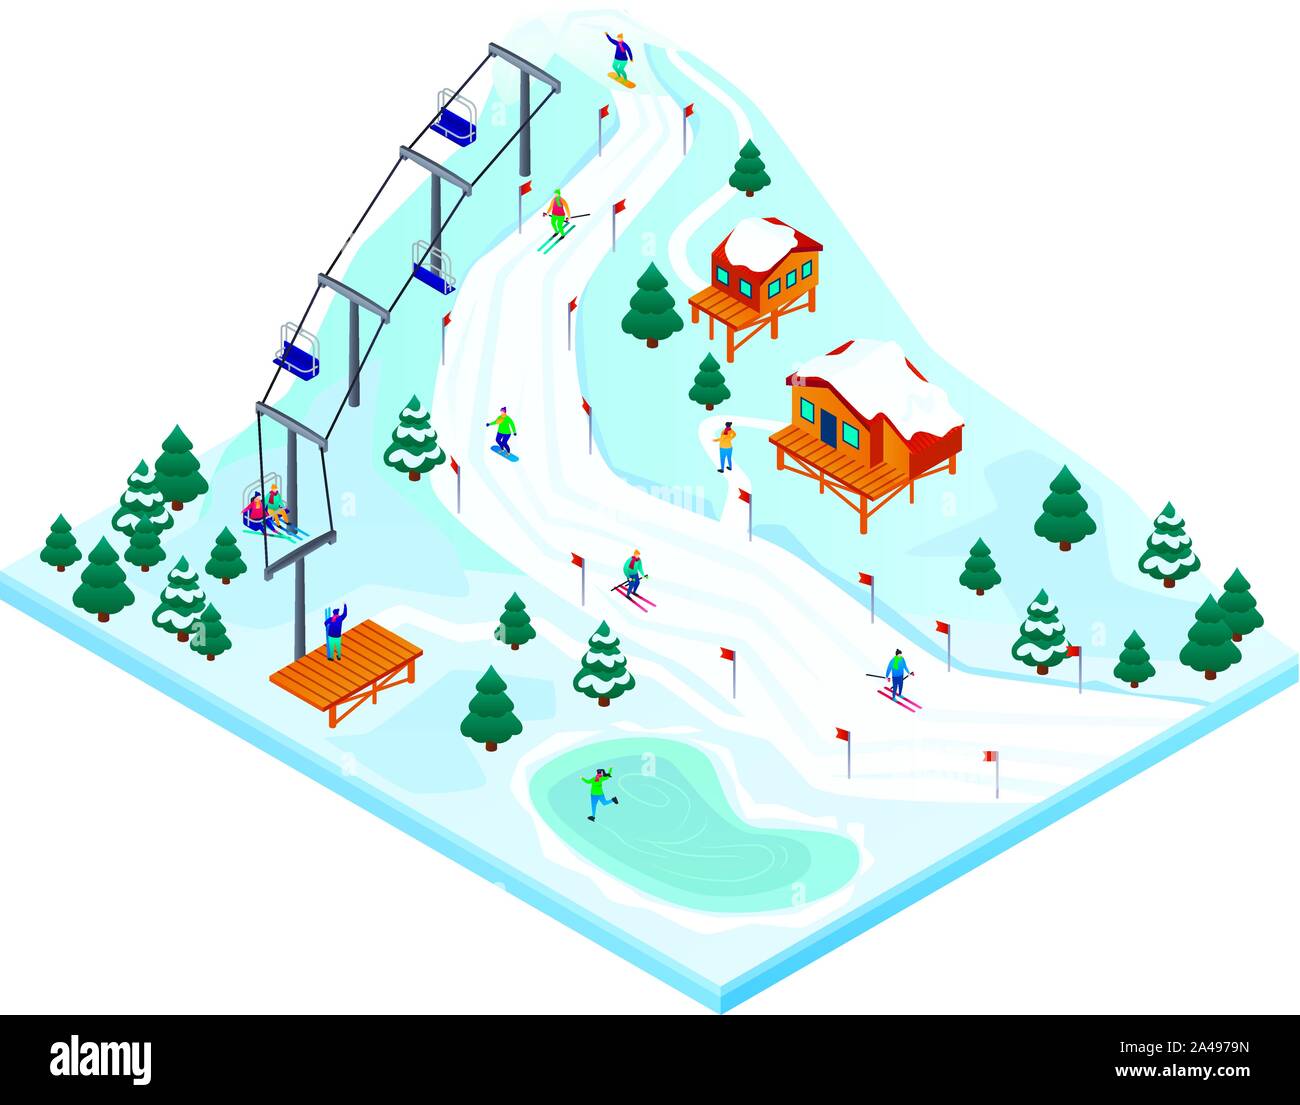 Snowboard Homme Silhouette Vector Illustration 3d